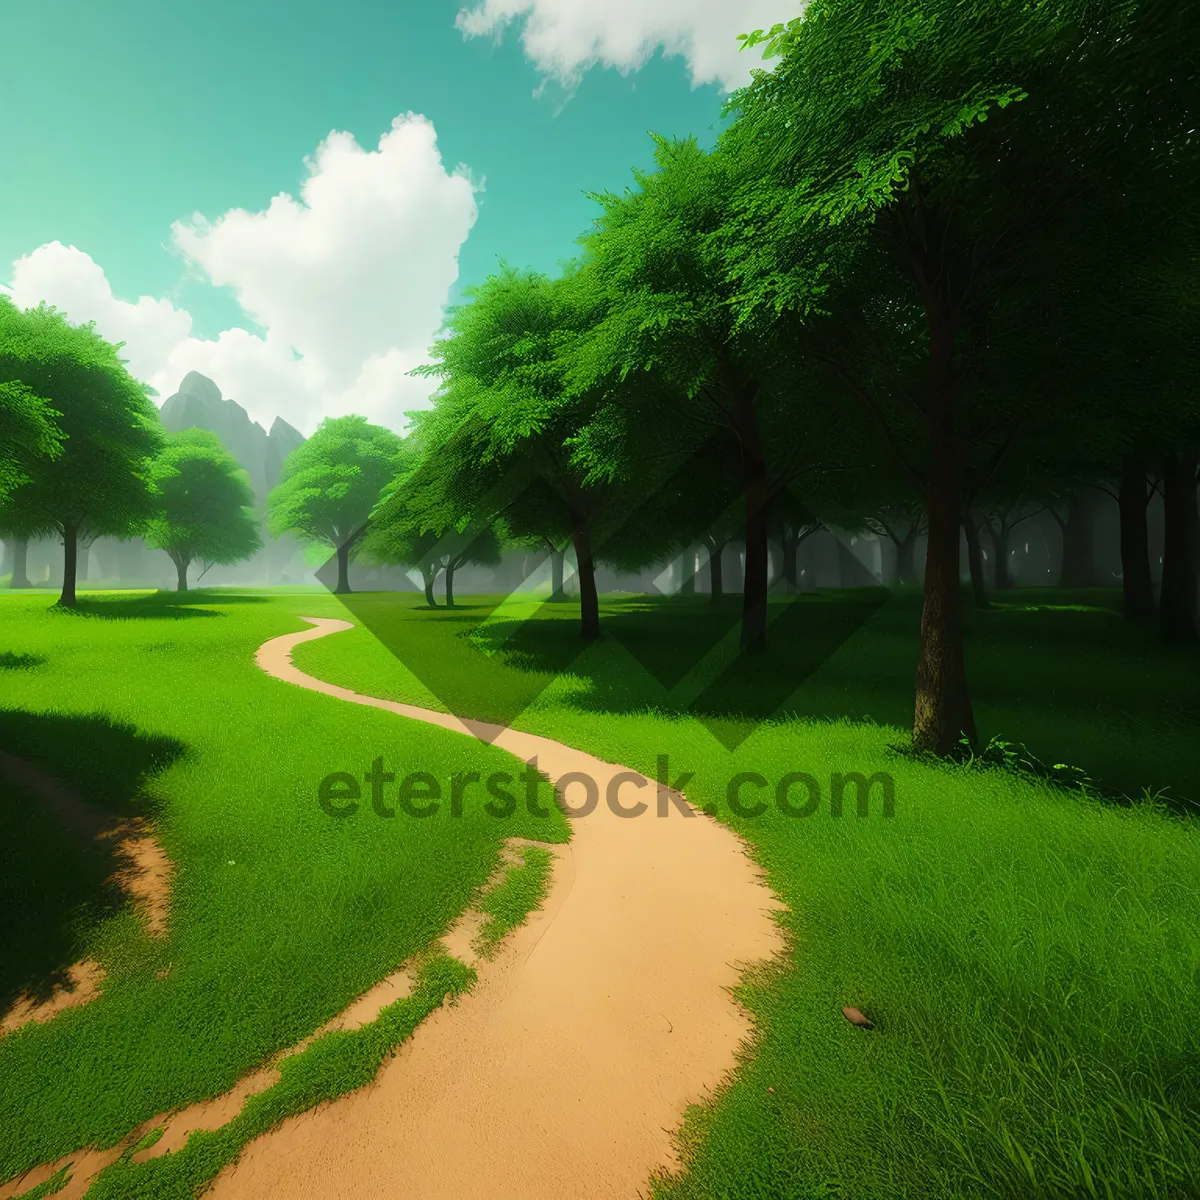 Picture of Scenic Golf Course Landscape under Blue Sky